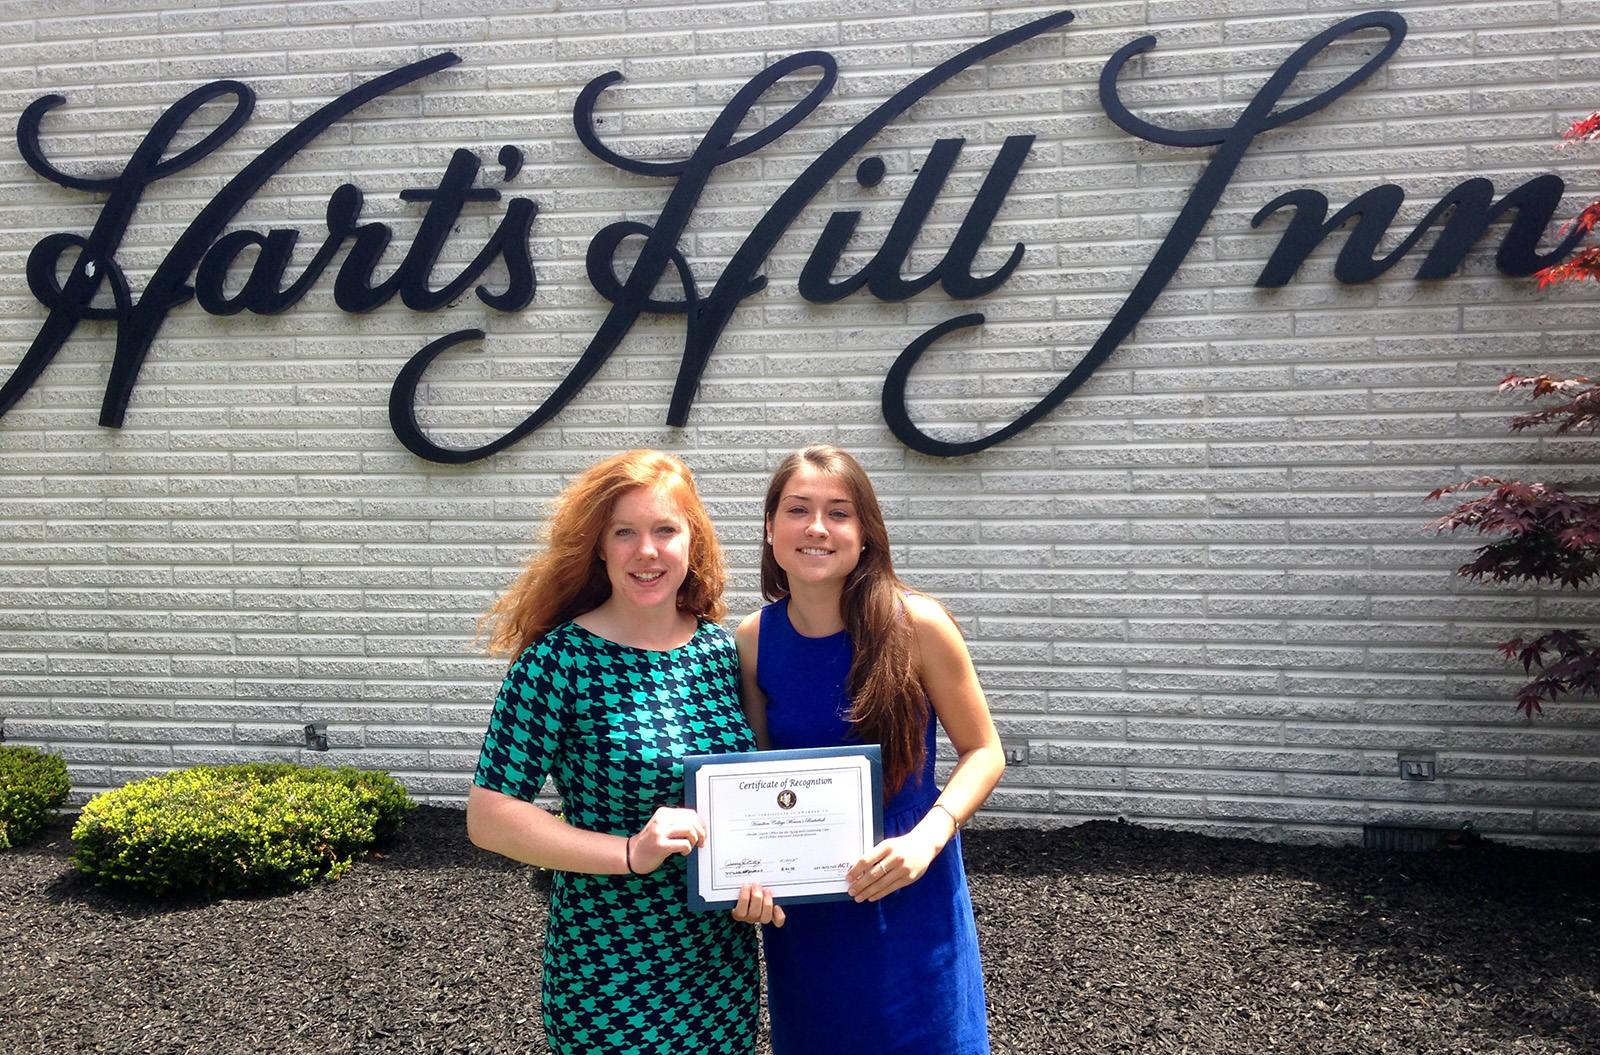 Women's basketball student-athletes Adrianna Pulford '15 and Rachel Fredey '15 with a certificate of recognition from the Oneida County Office for the Aging and Continuing Care as a 2015 Older American Awards Honoree.